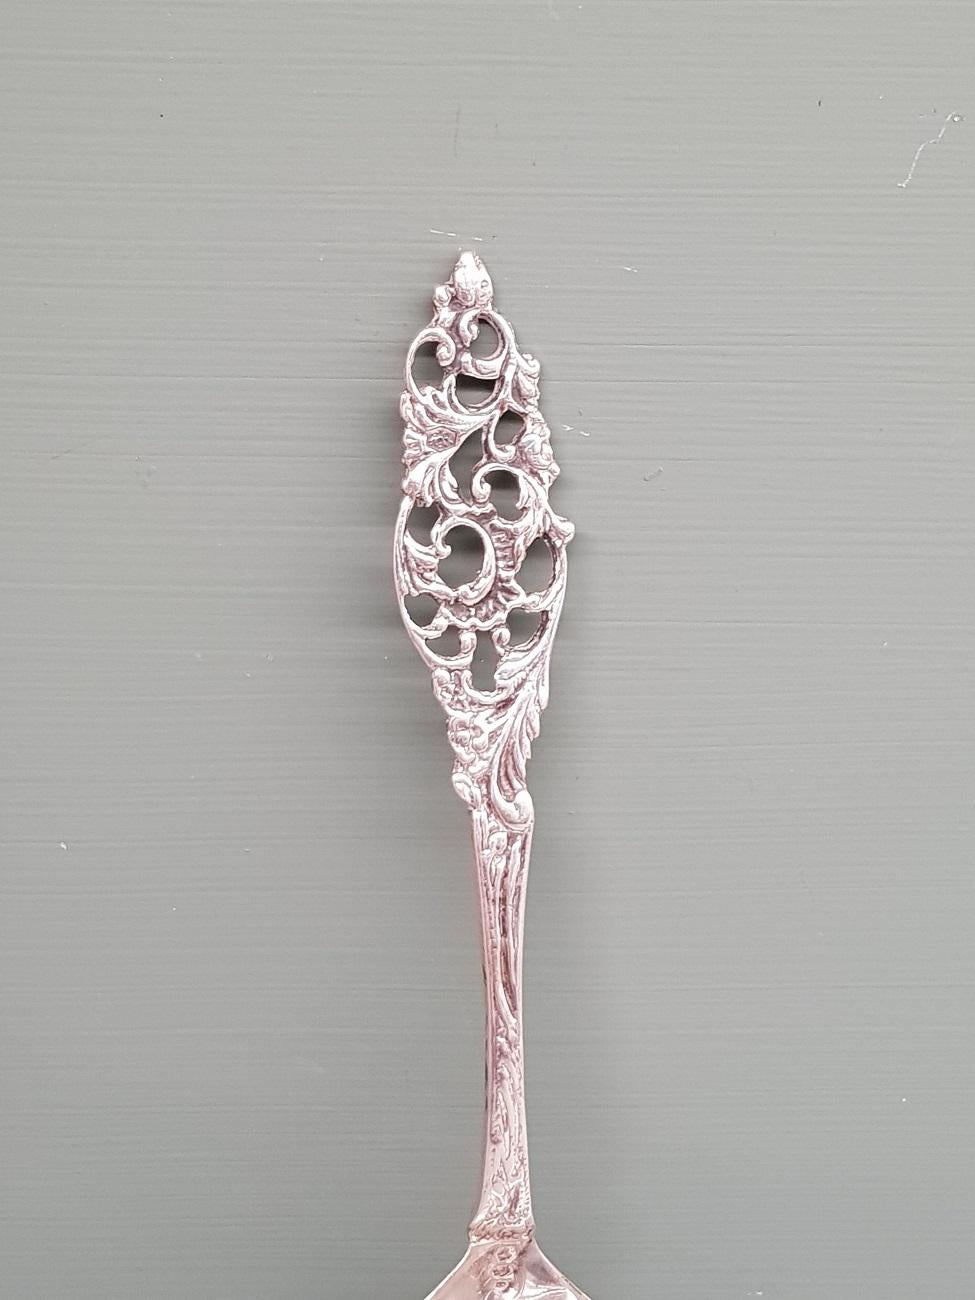 Old Dutch silver sugar spoon decorated with a floral decor and is marked with lion, minerva and year letter C from 1937. It's in a used but good condition.

The measurements are:
Depth 3.5 cm/ 1.3 inch.
Width 4 cm/ 1.5 inch.
Height 16 cm/ 6.2